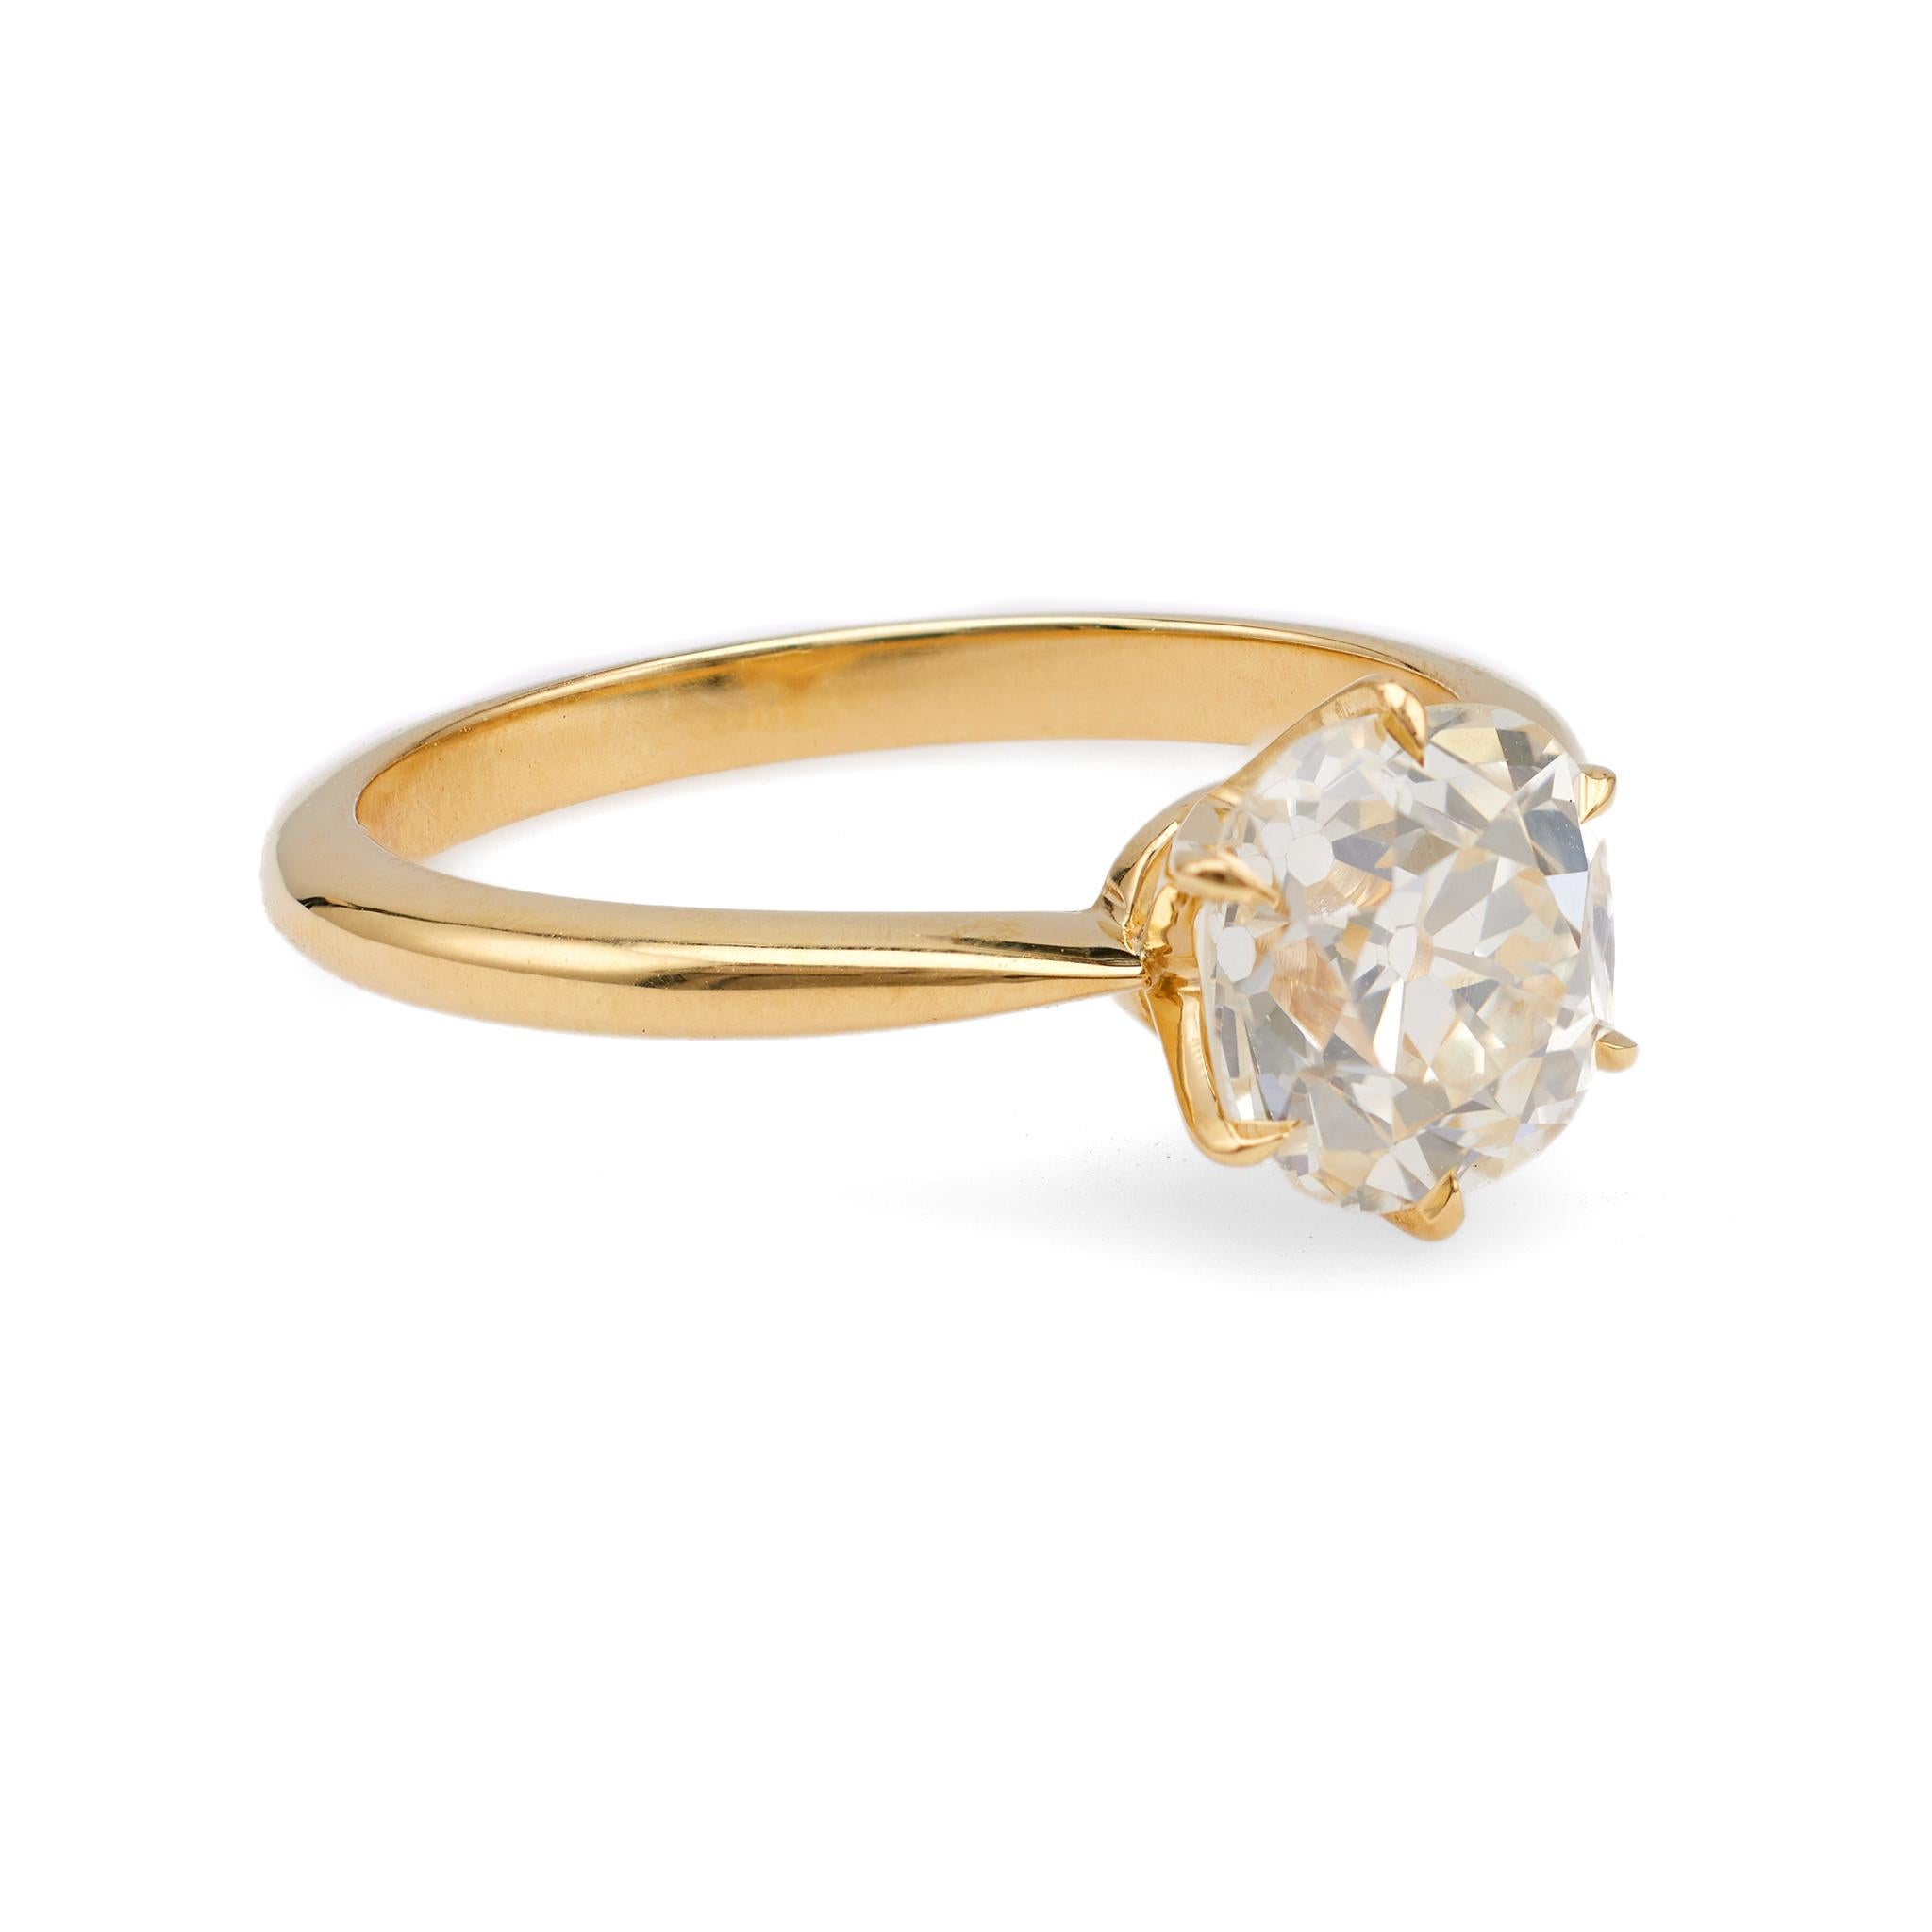 Women's or Men's GIA 1.74 Carat Old Mine Cut Diamond 18k Yellow Gold Solitaire Ring